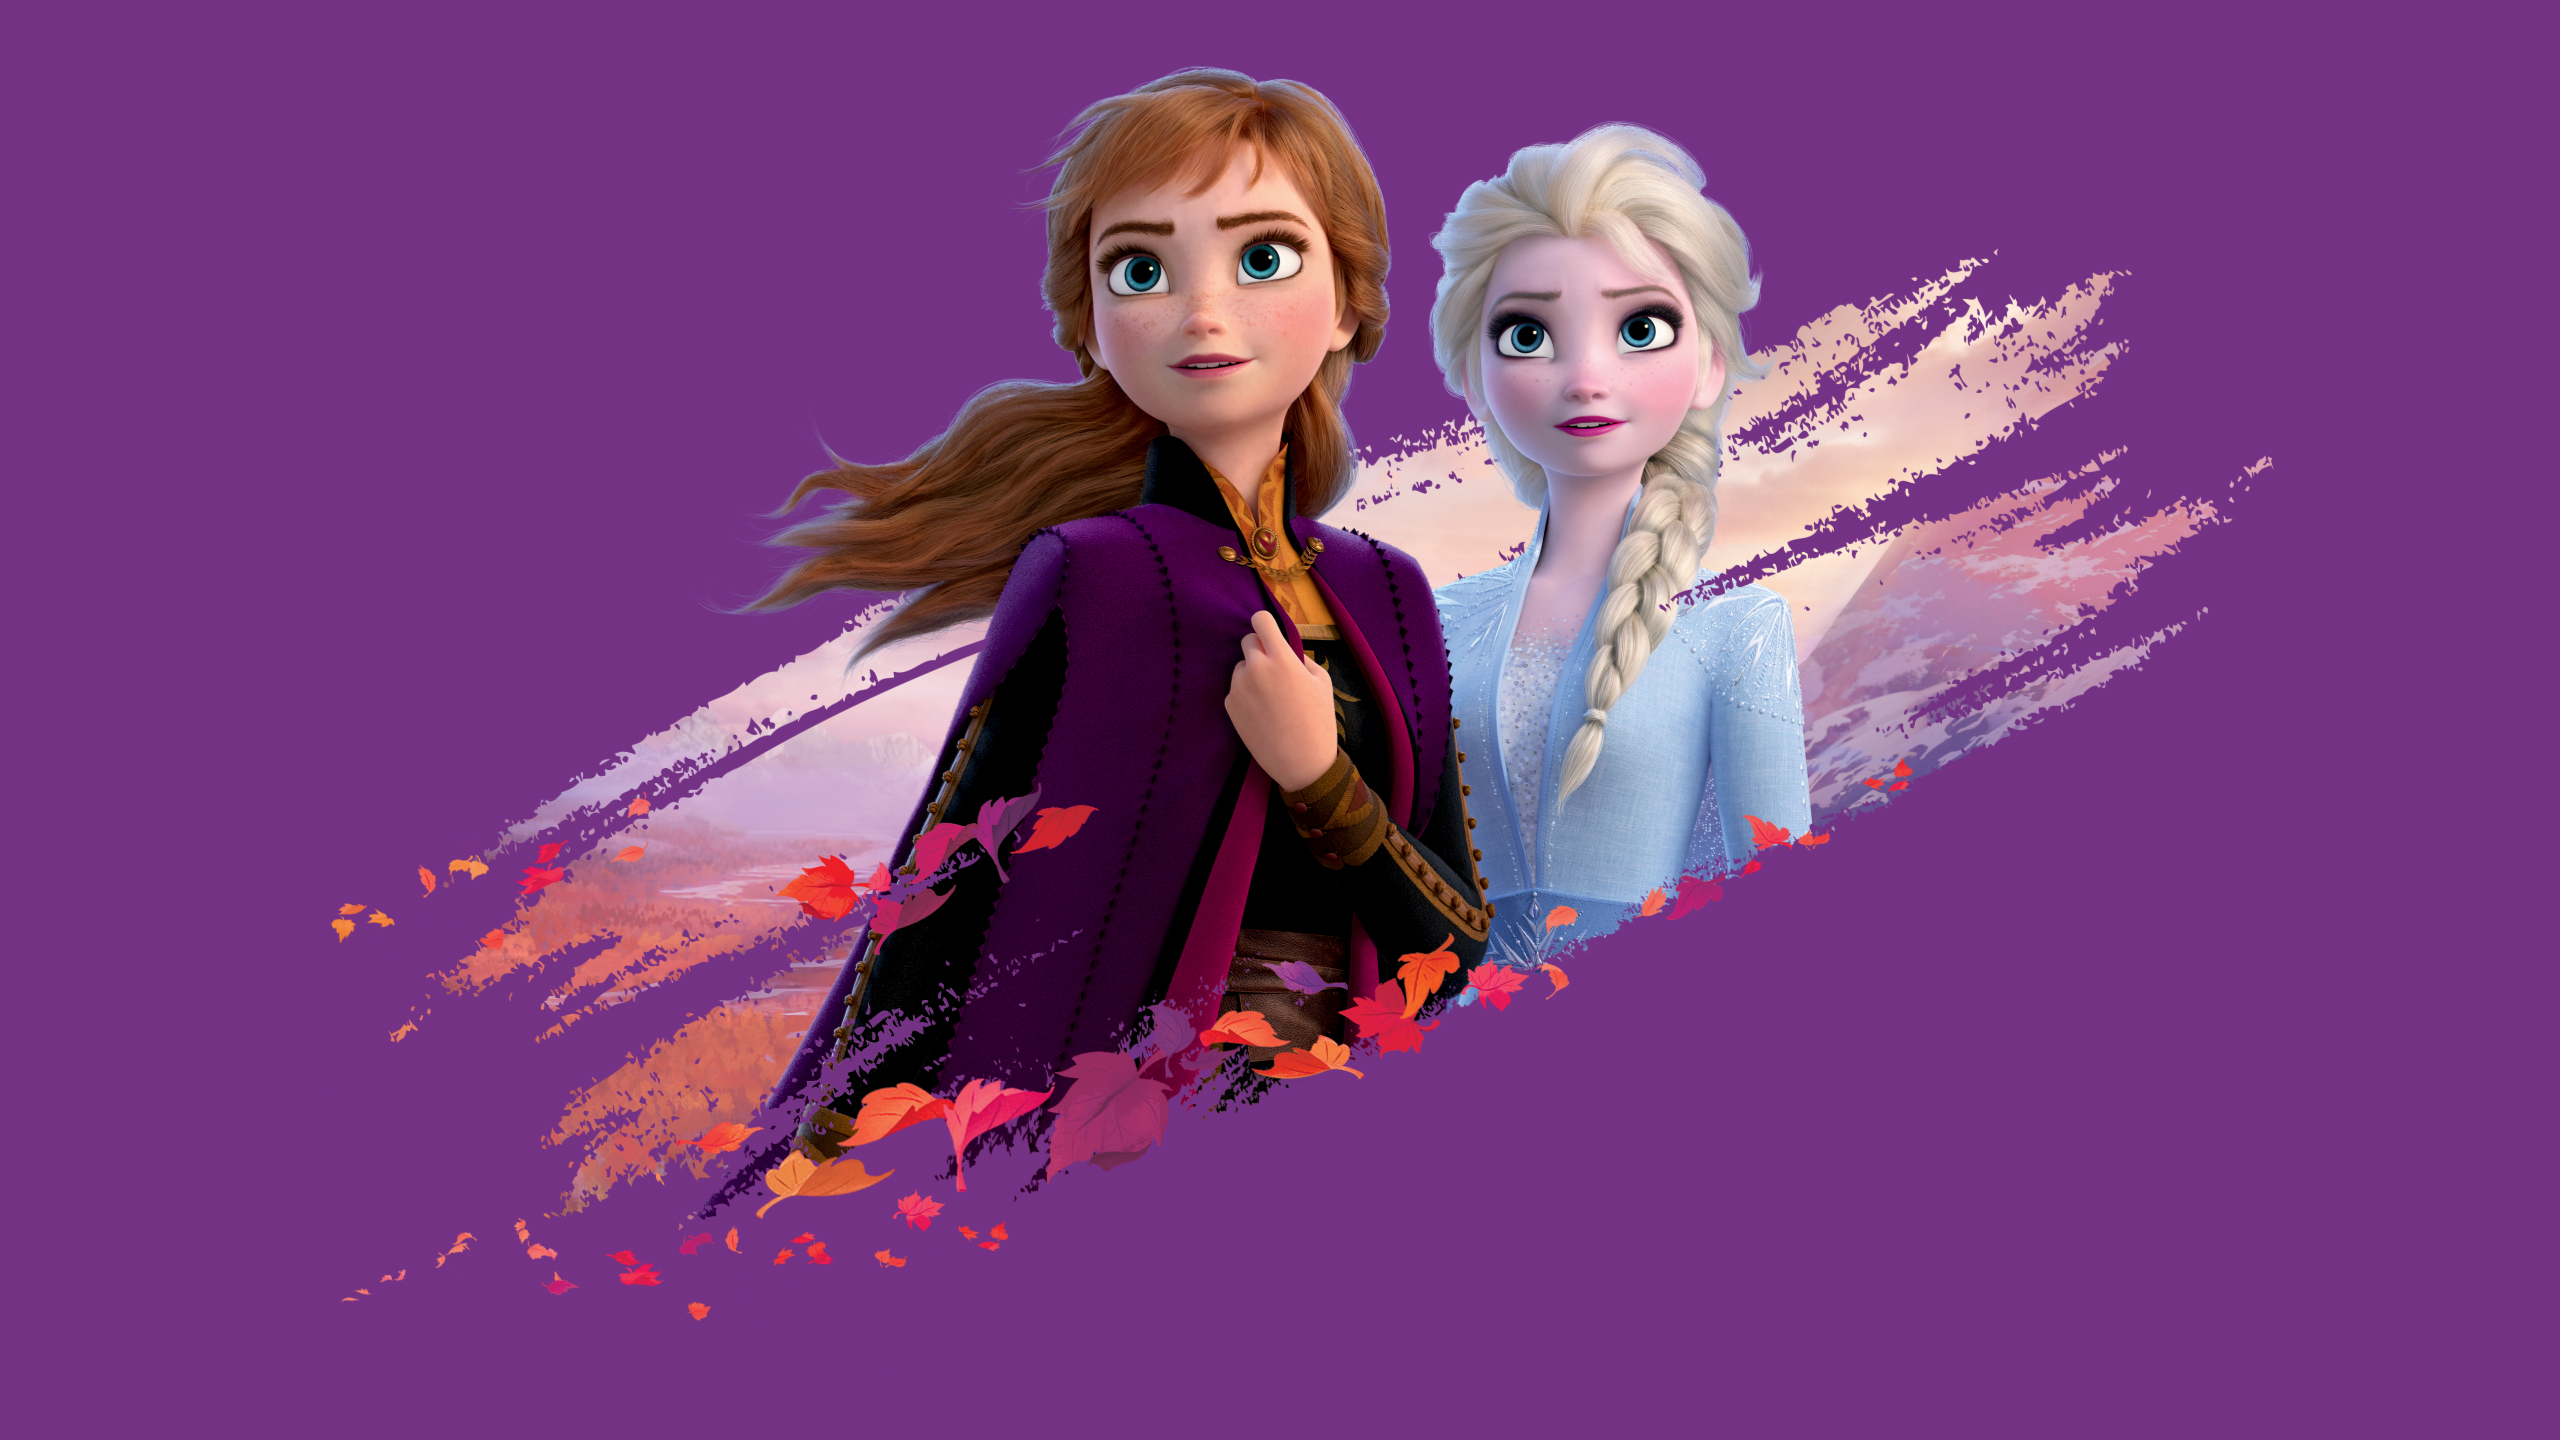 Frozen download the new for ios